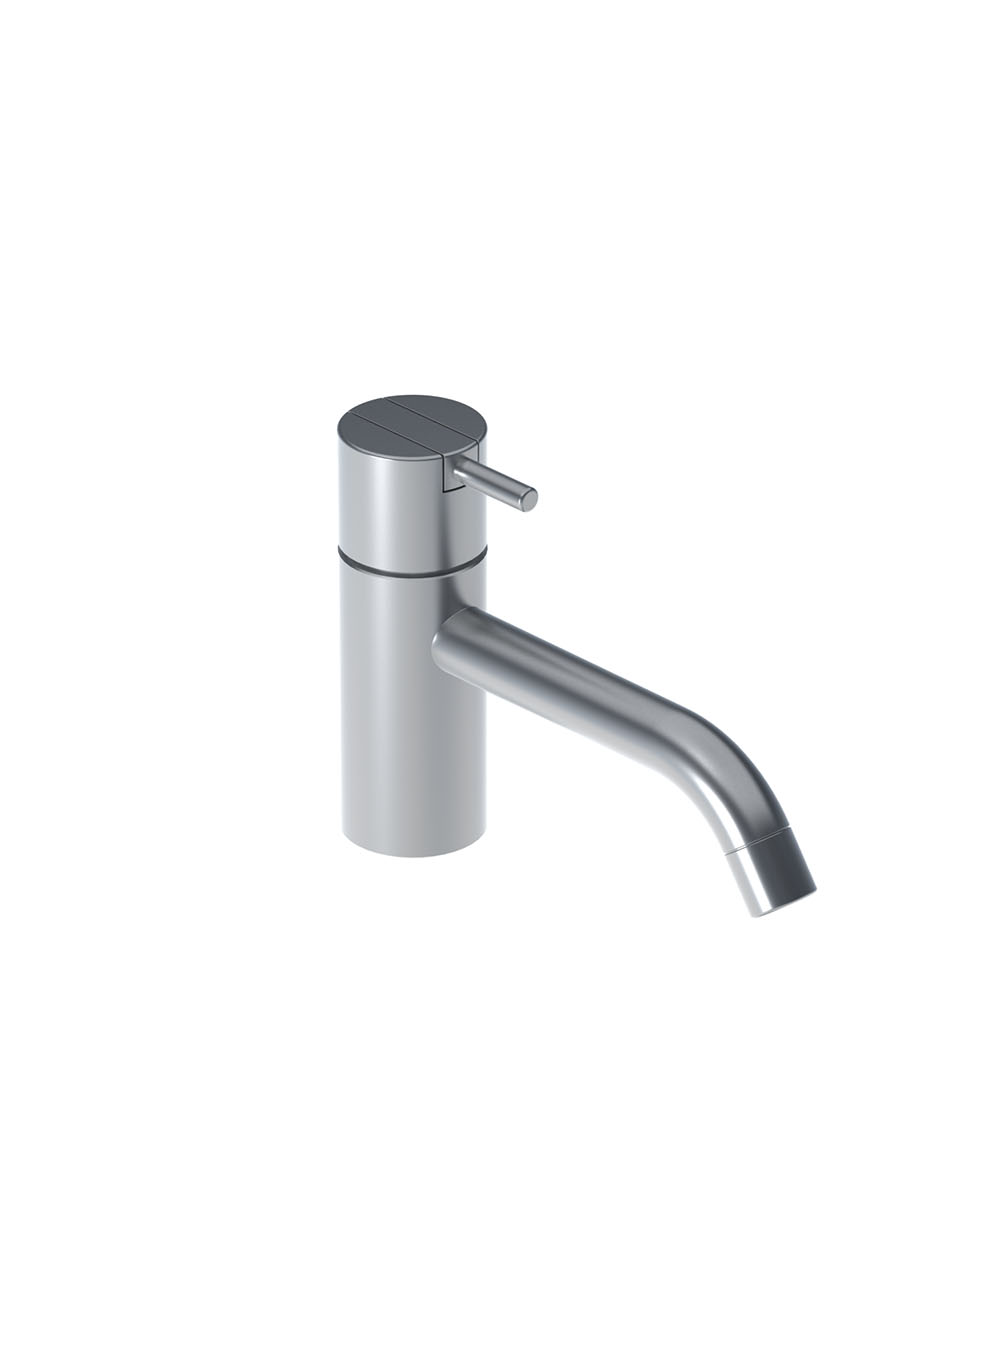 HV1/150: One-handle mixer with ceramic disc technology, fixed spout 150 mm with water saving aerator. Heig...